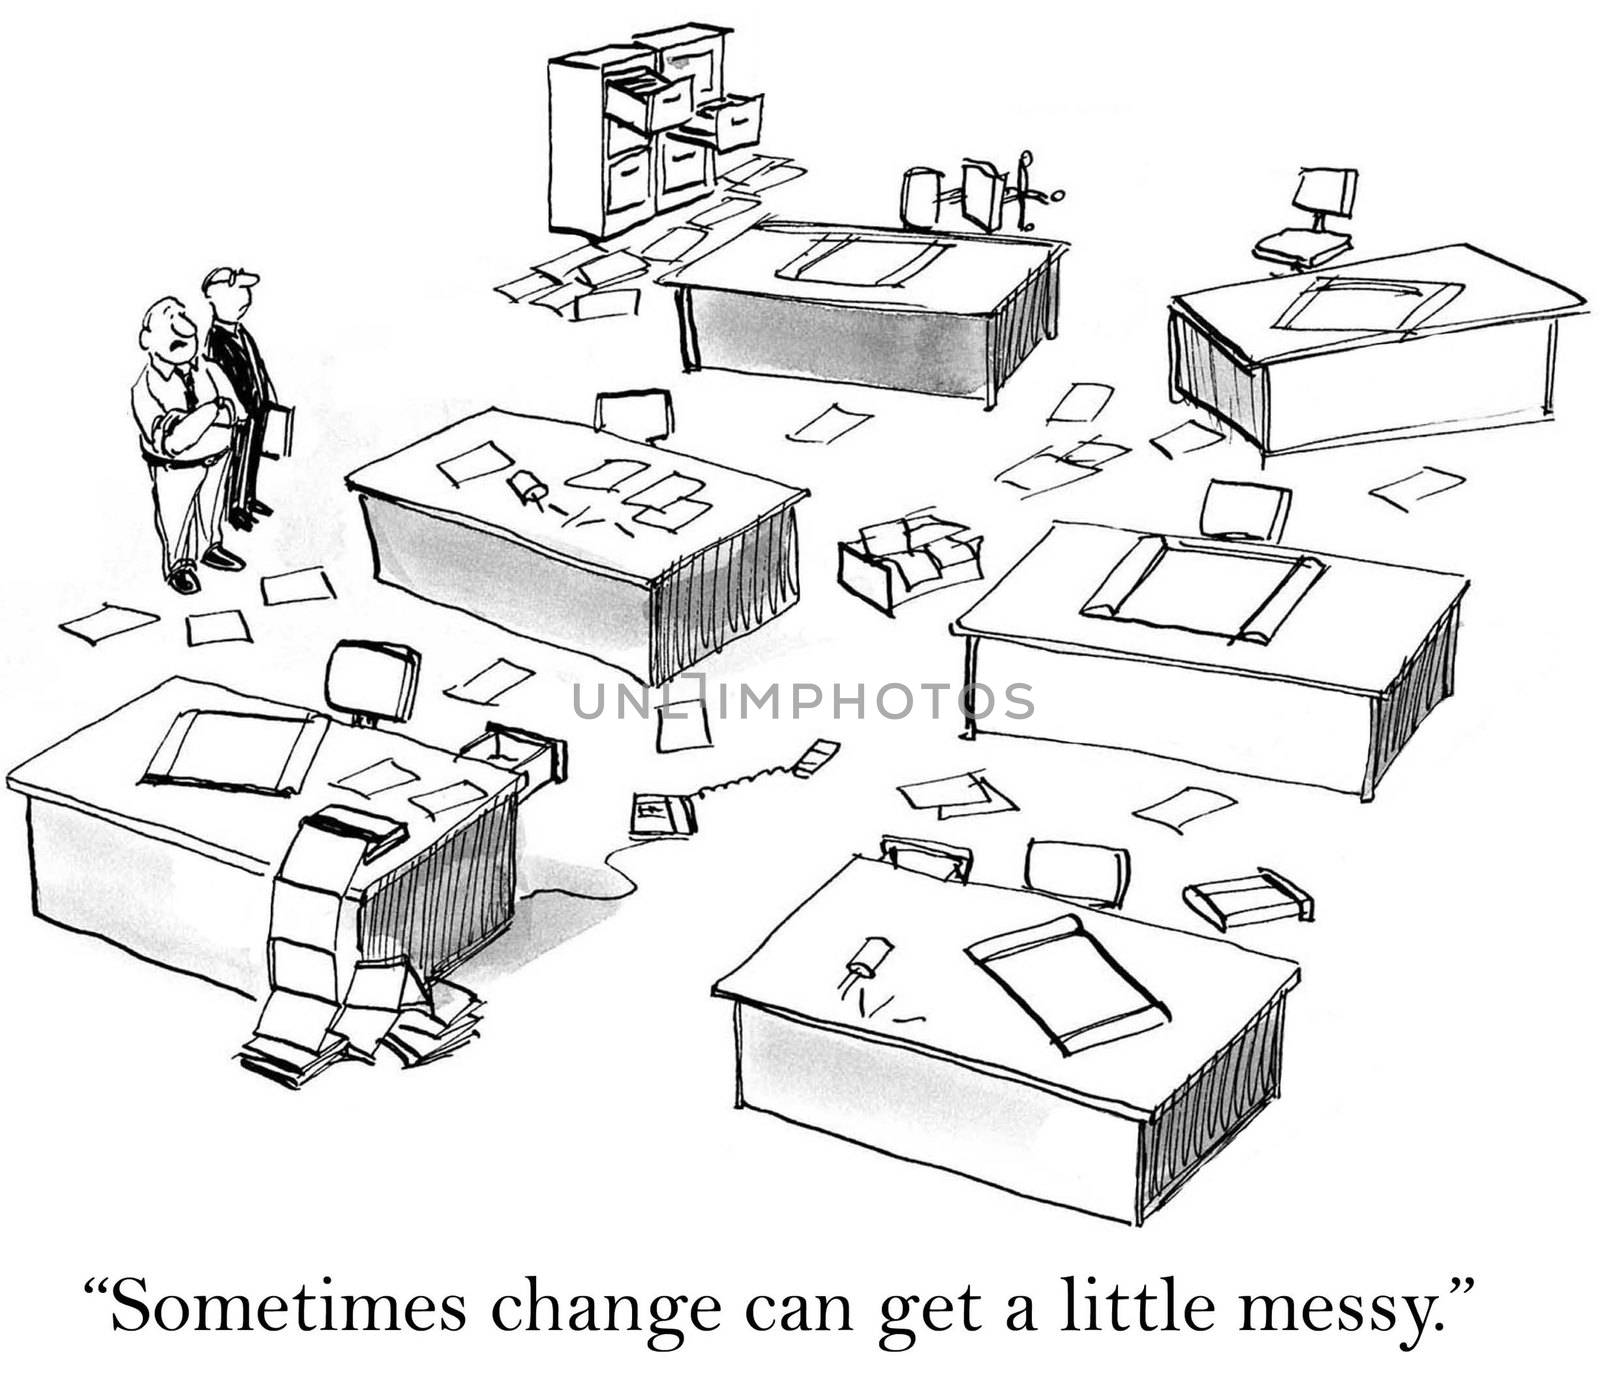 "Sometimes change can get a little messy."